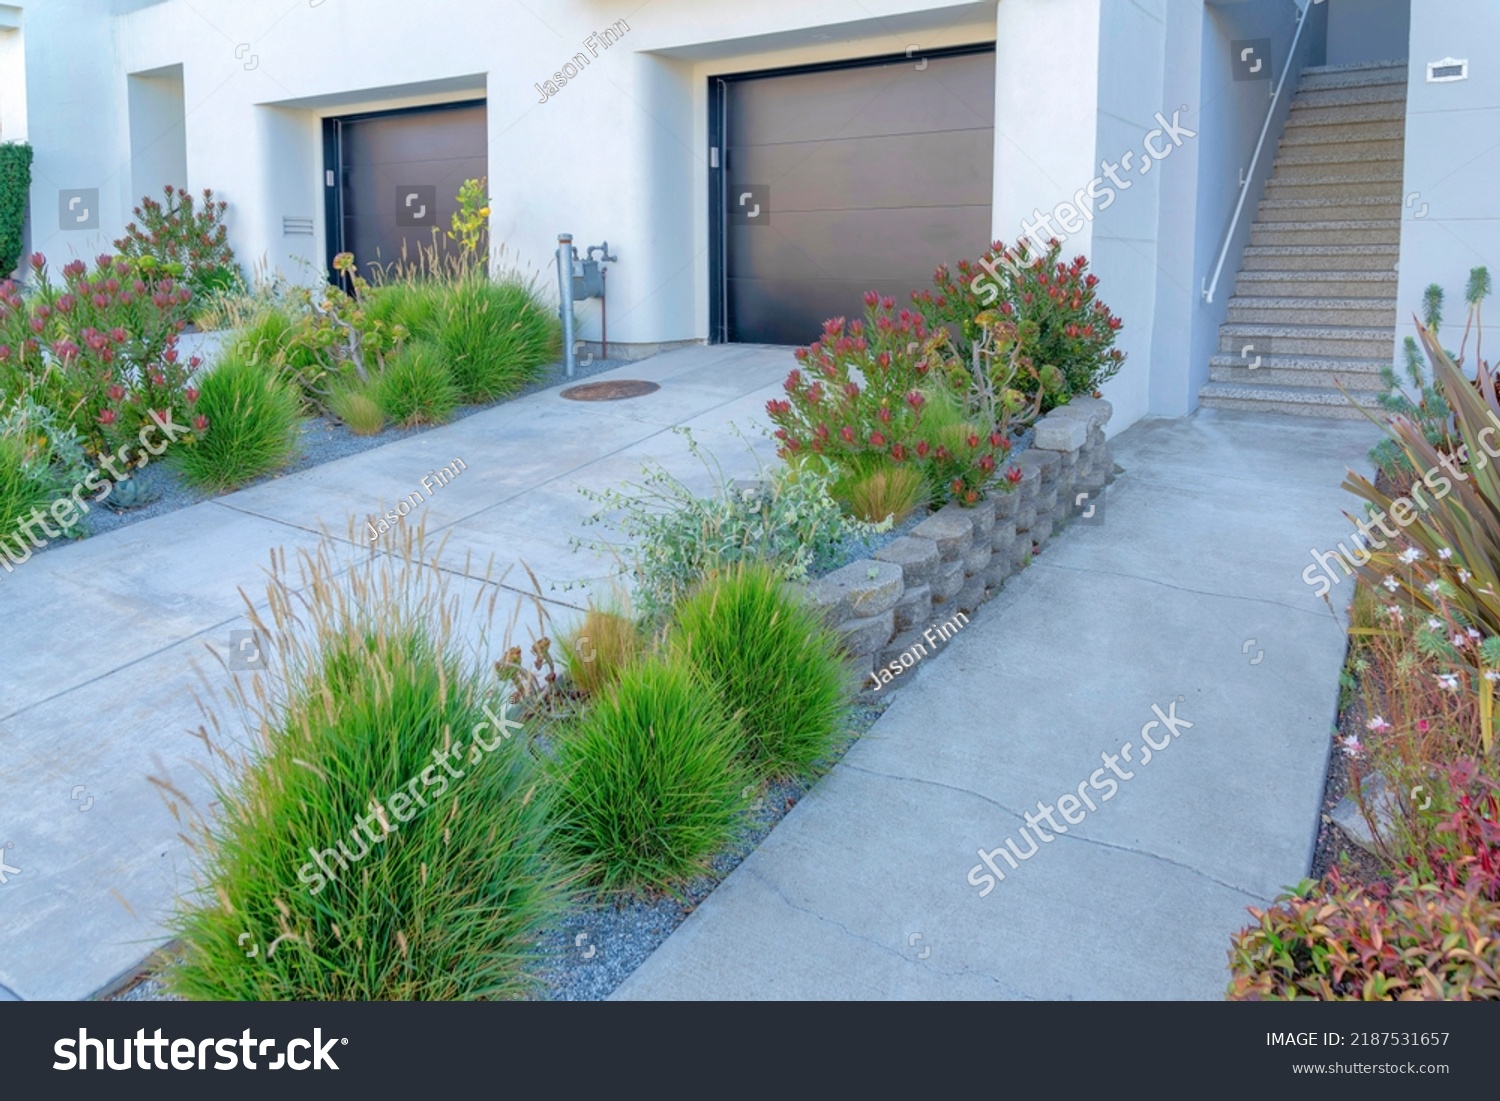 Concrete pathway near the driveway with plants on the side at San Francisco, California. Walkway leading to a concrete stairs on the right beside the two garage with black doors. #2187531657